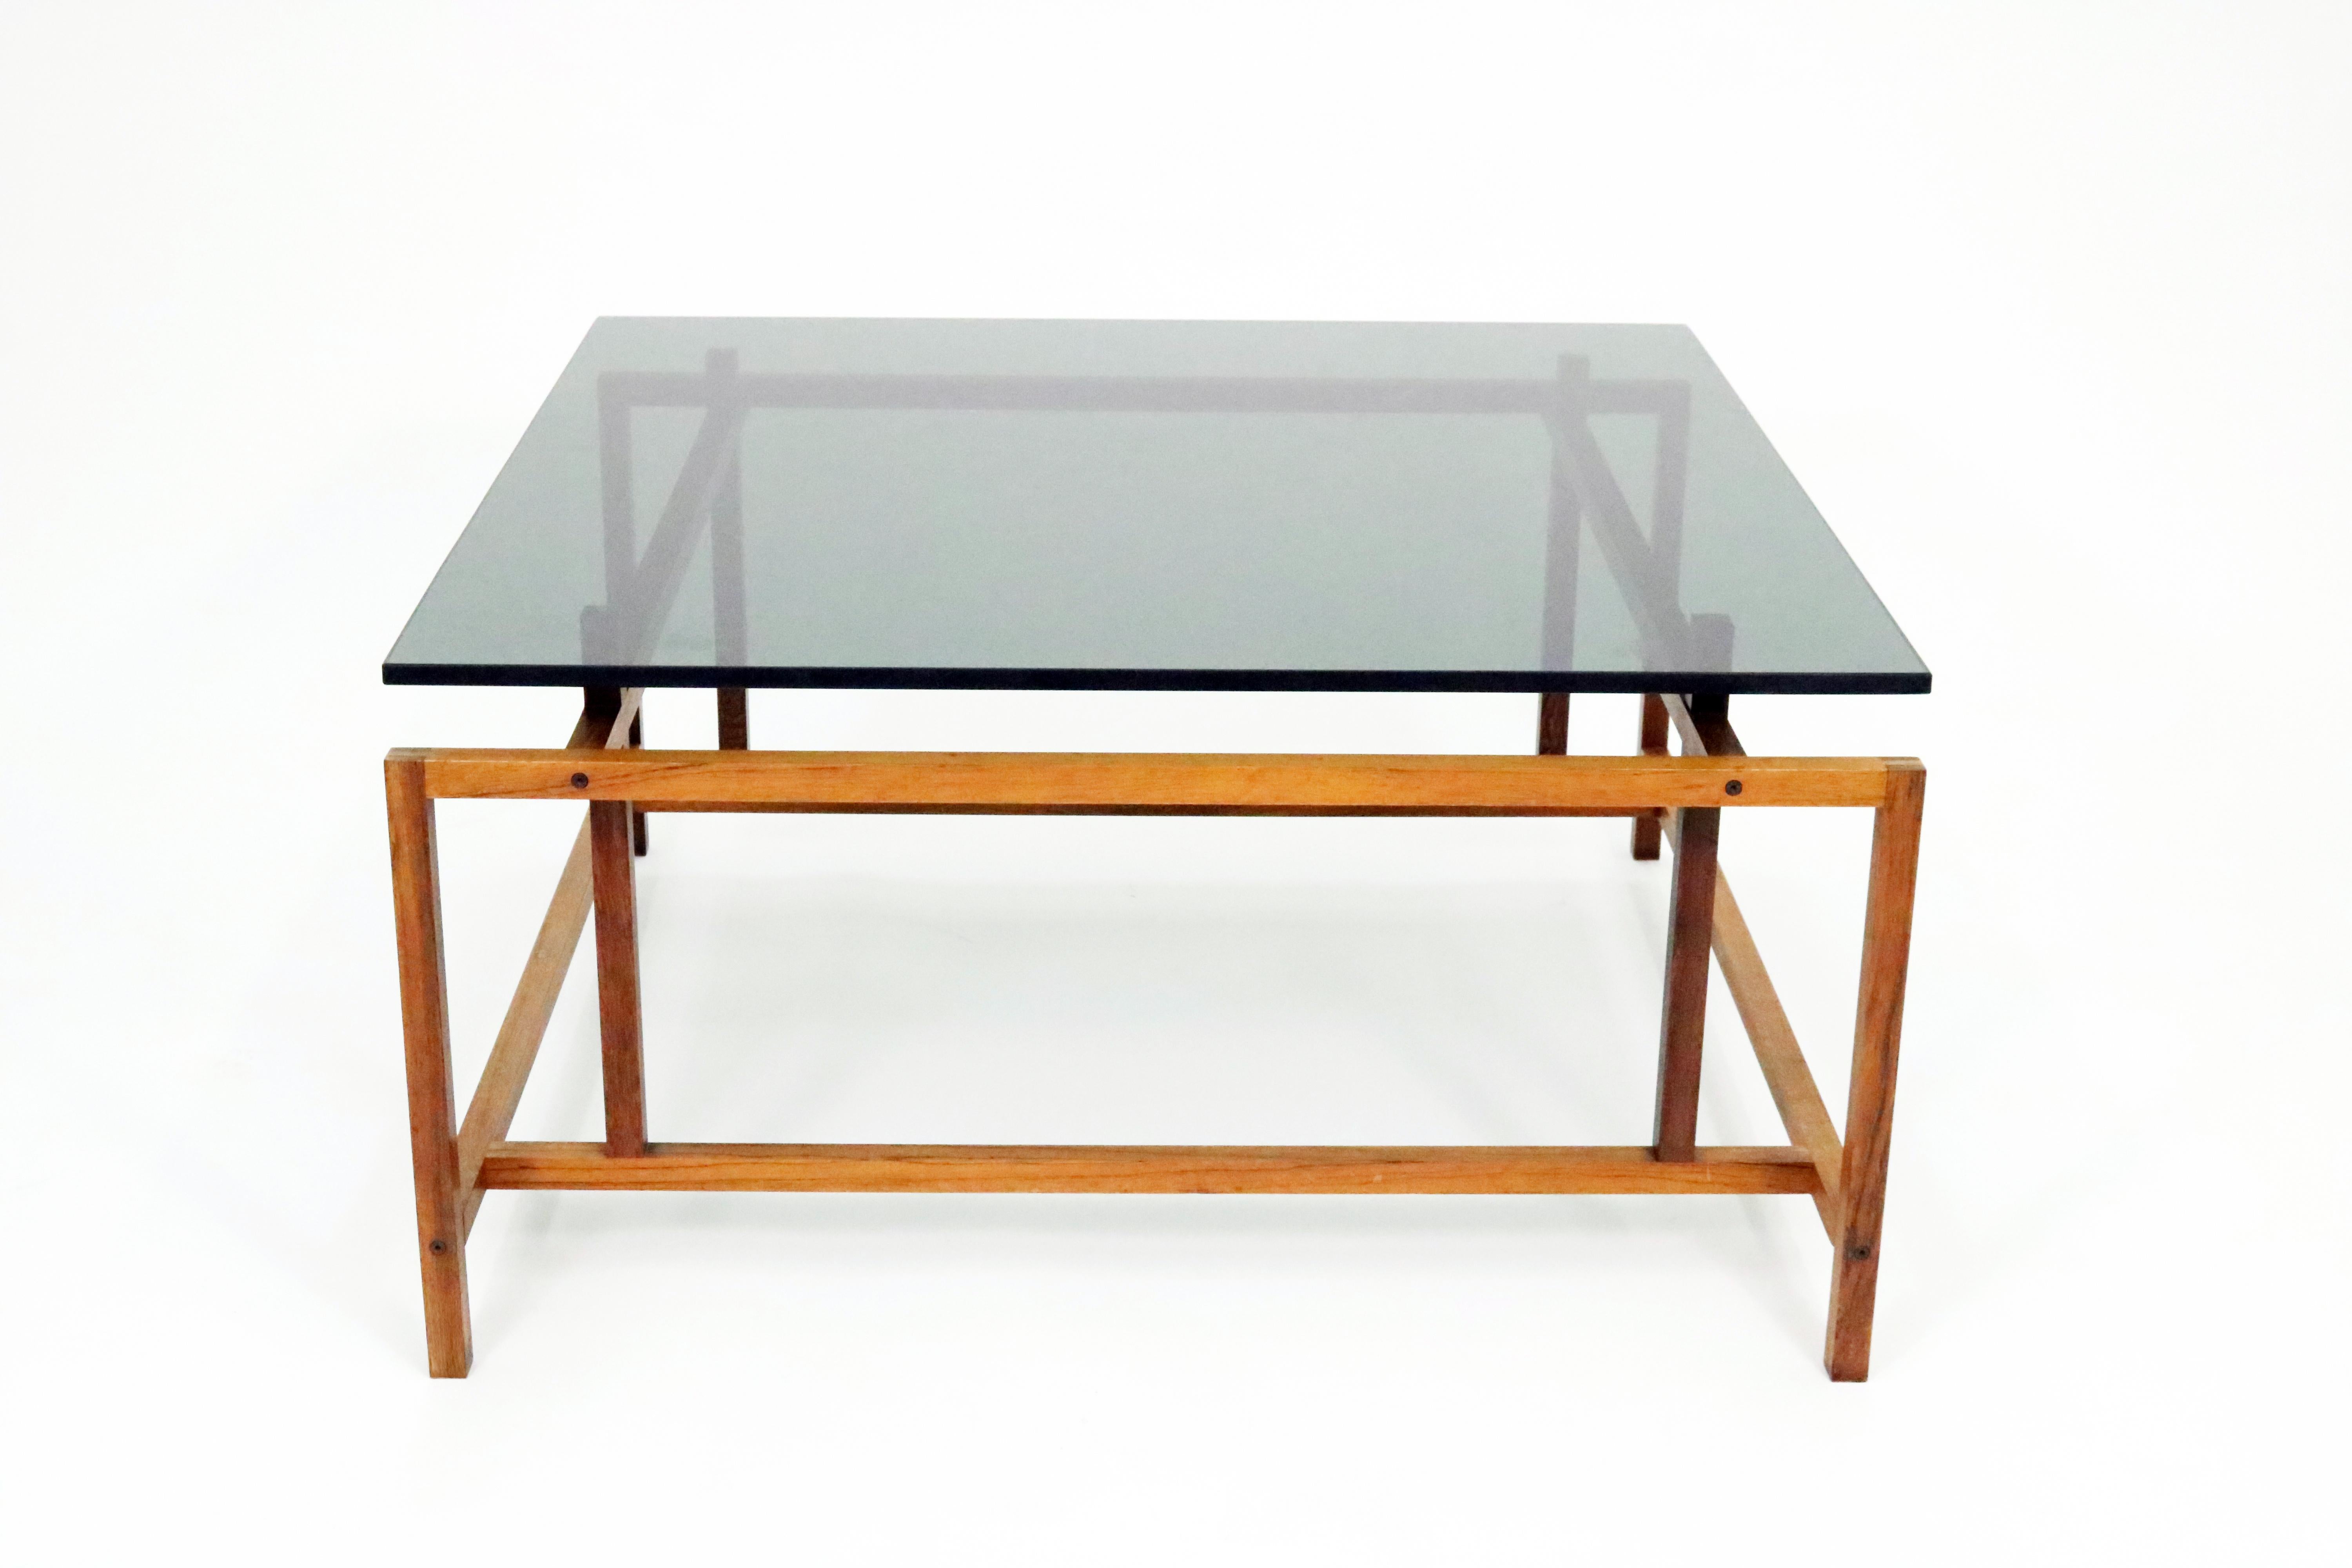 A sleekly architectural Scandinavian Modern Danish coffee table in rosewood and smoked glass by Henning Norgaard for Komfort. 

Minimalist geometric solid rosewood base displays excellent craftsmanship, with both mortise-and-tenon and finger